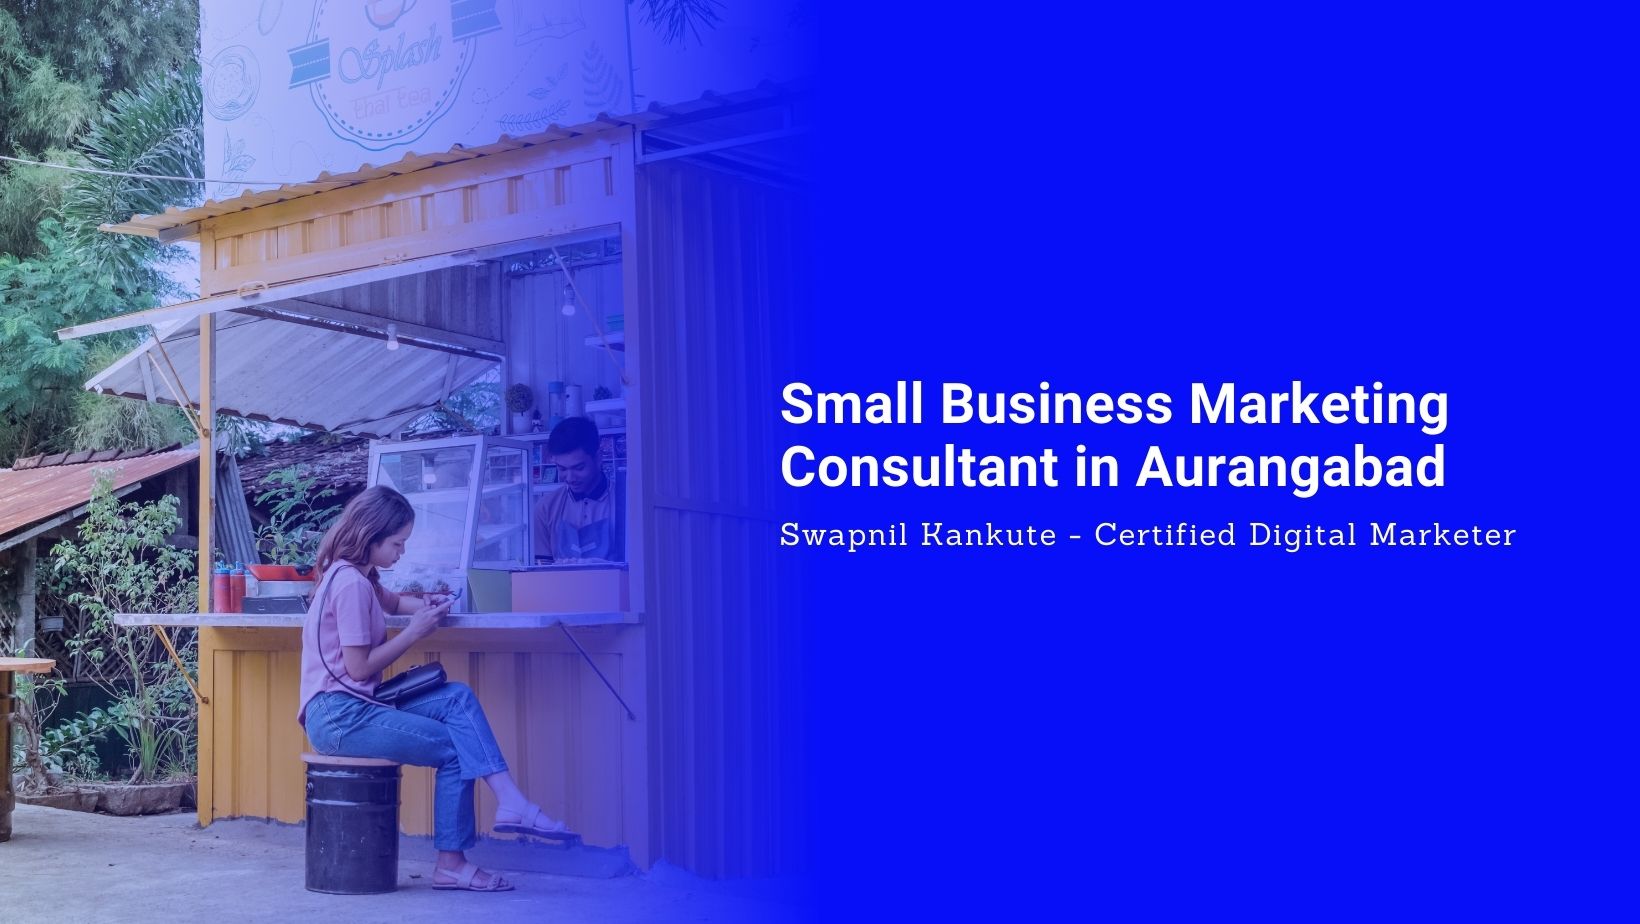 Small Business Marketing Consultant in Aurangabad